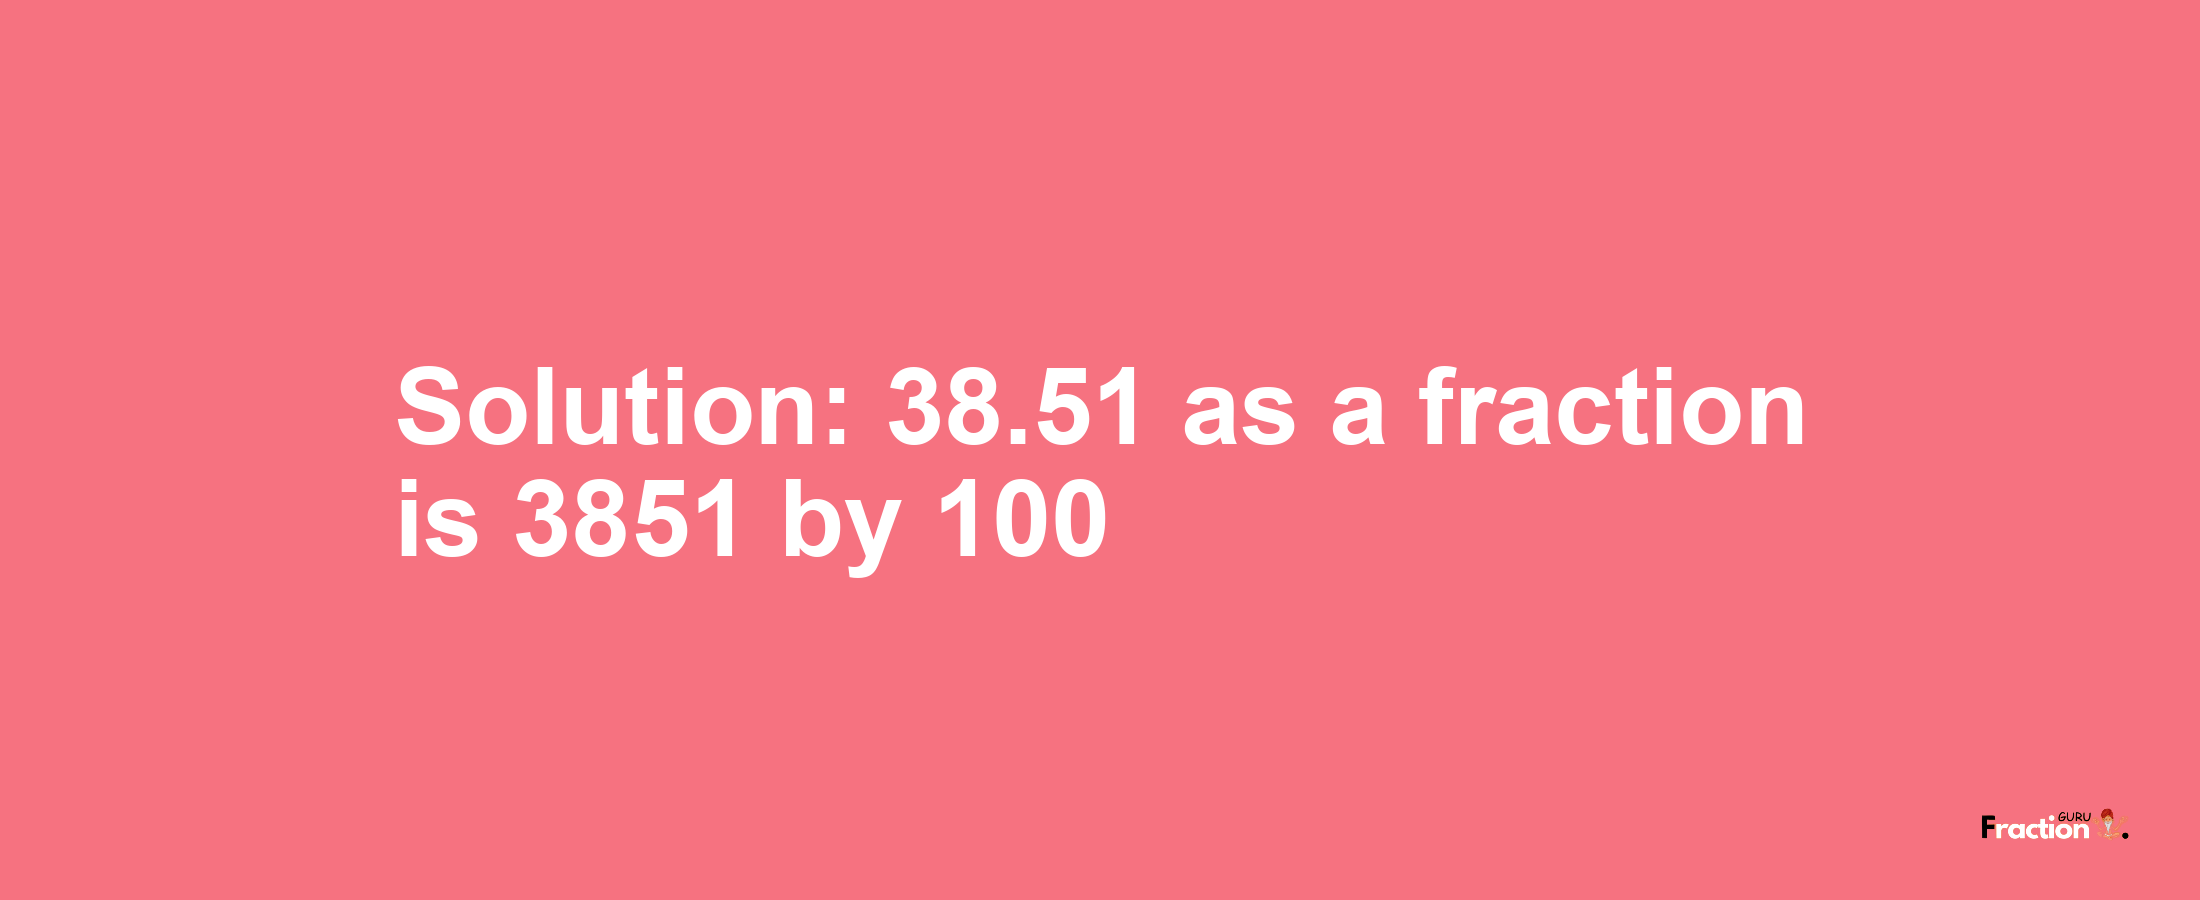 Solution:38.51 as a fraction is 3851/100